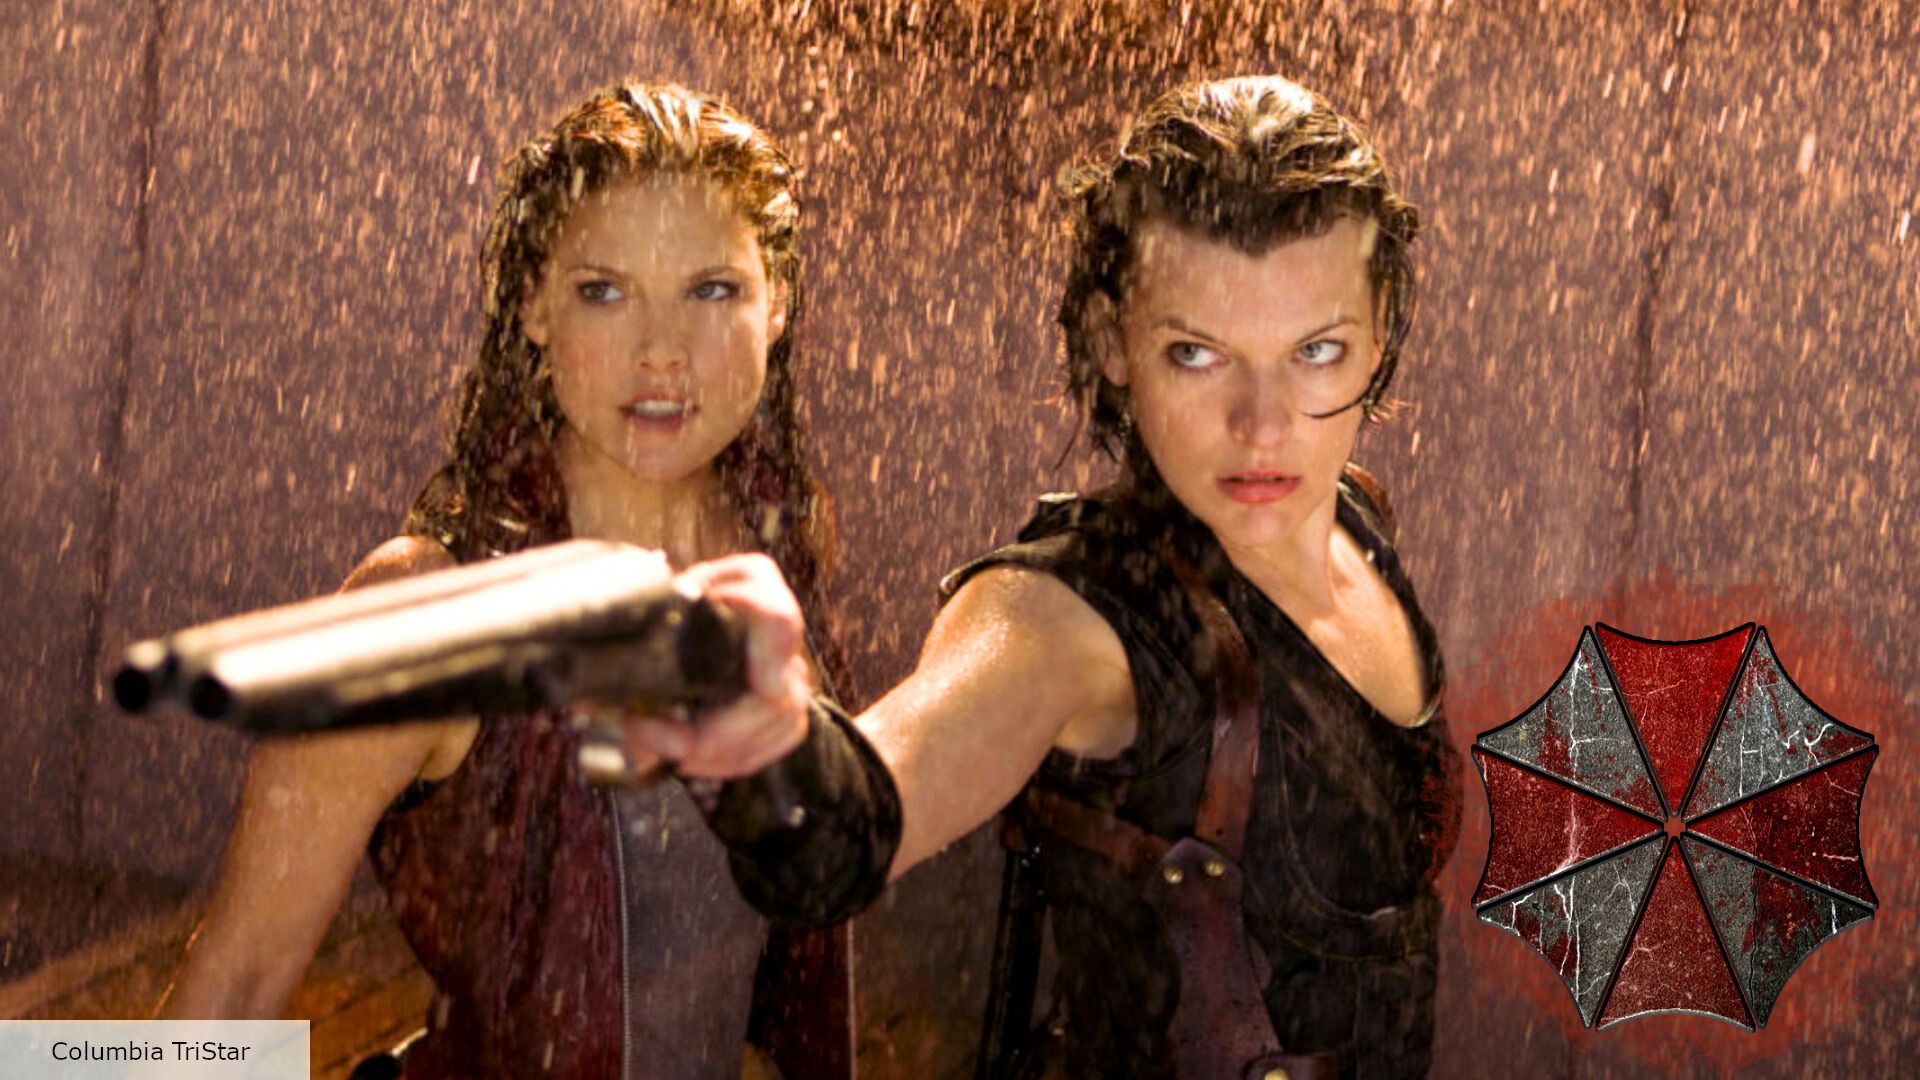 Your guide to watching all 'Resident Evil' movies and TV shows in order